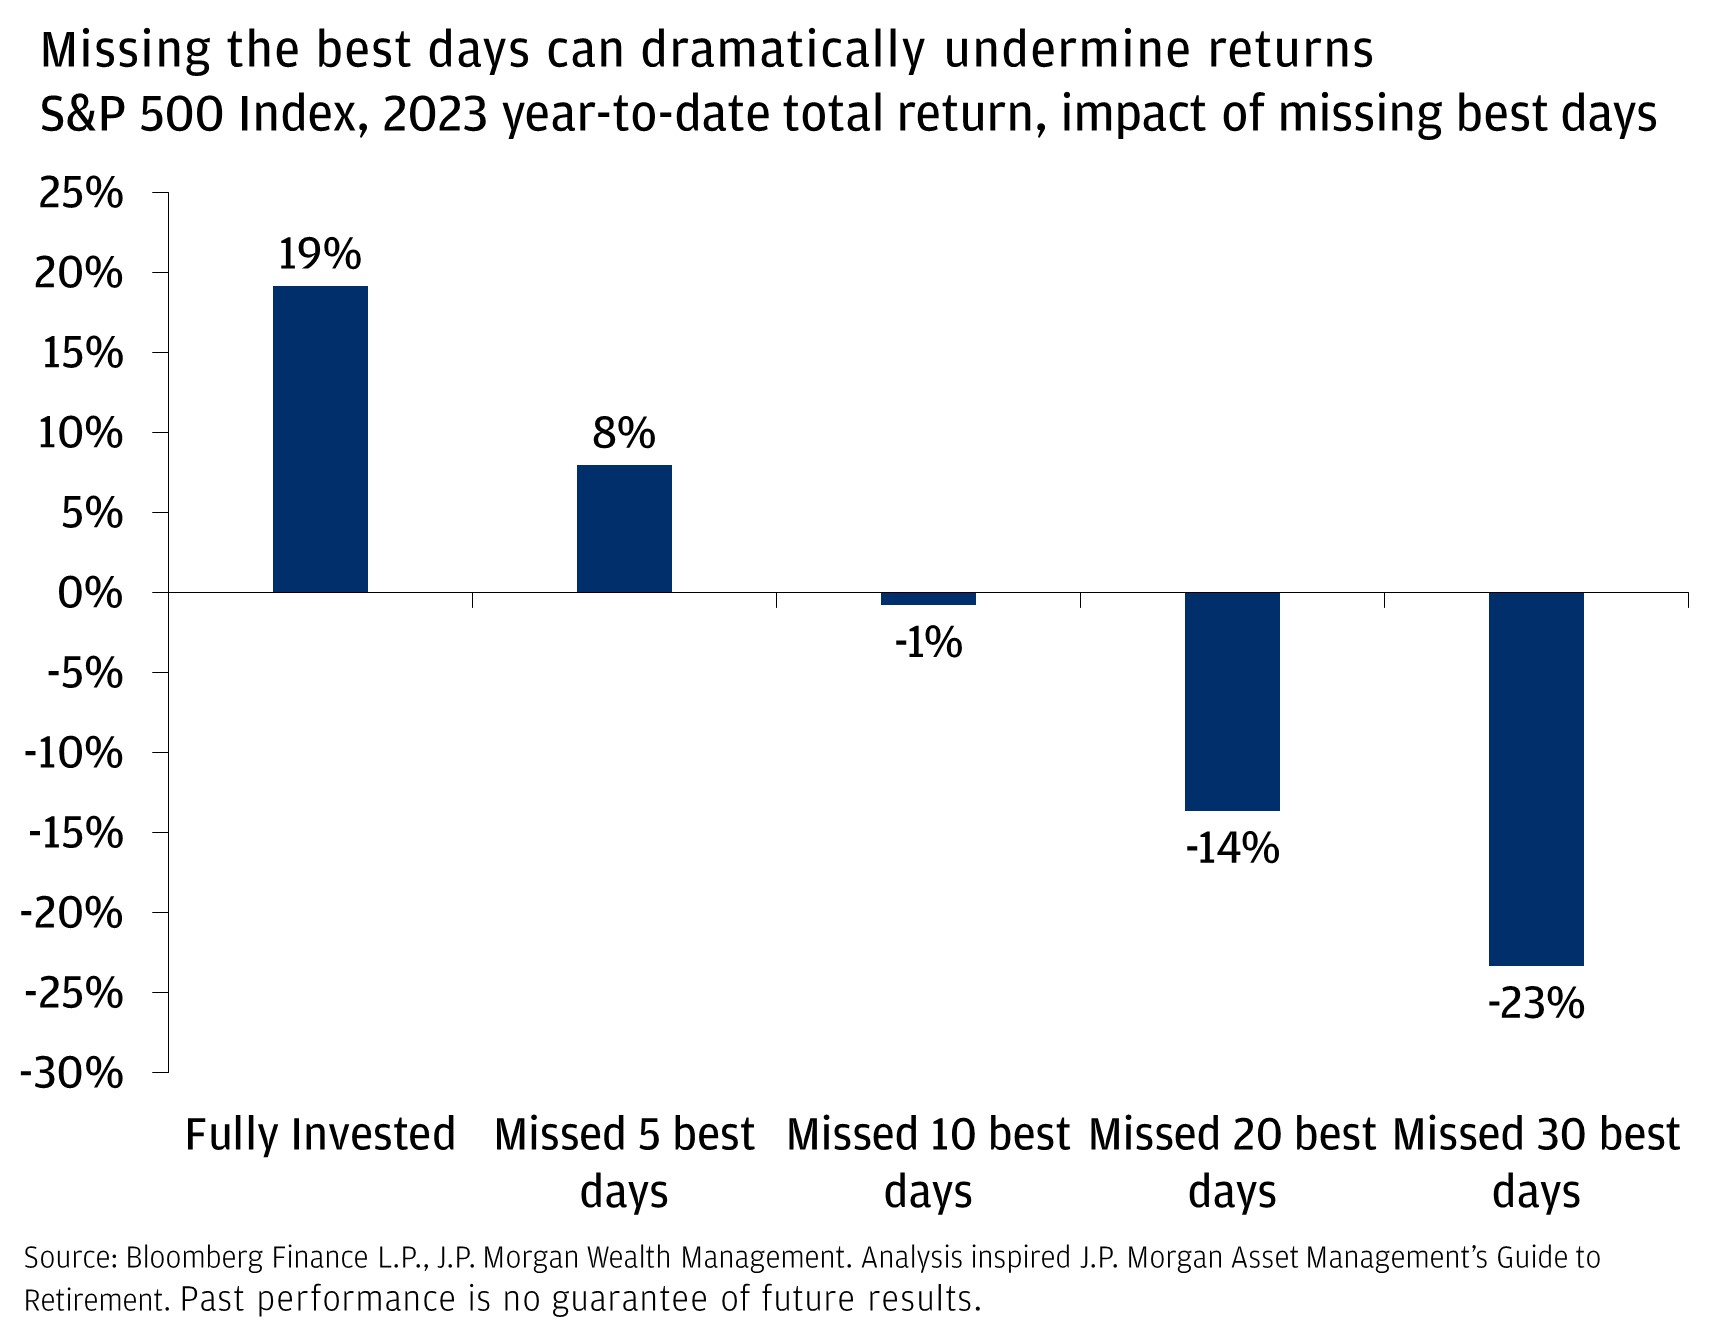 Missing the best days can dramatically undermine returns